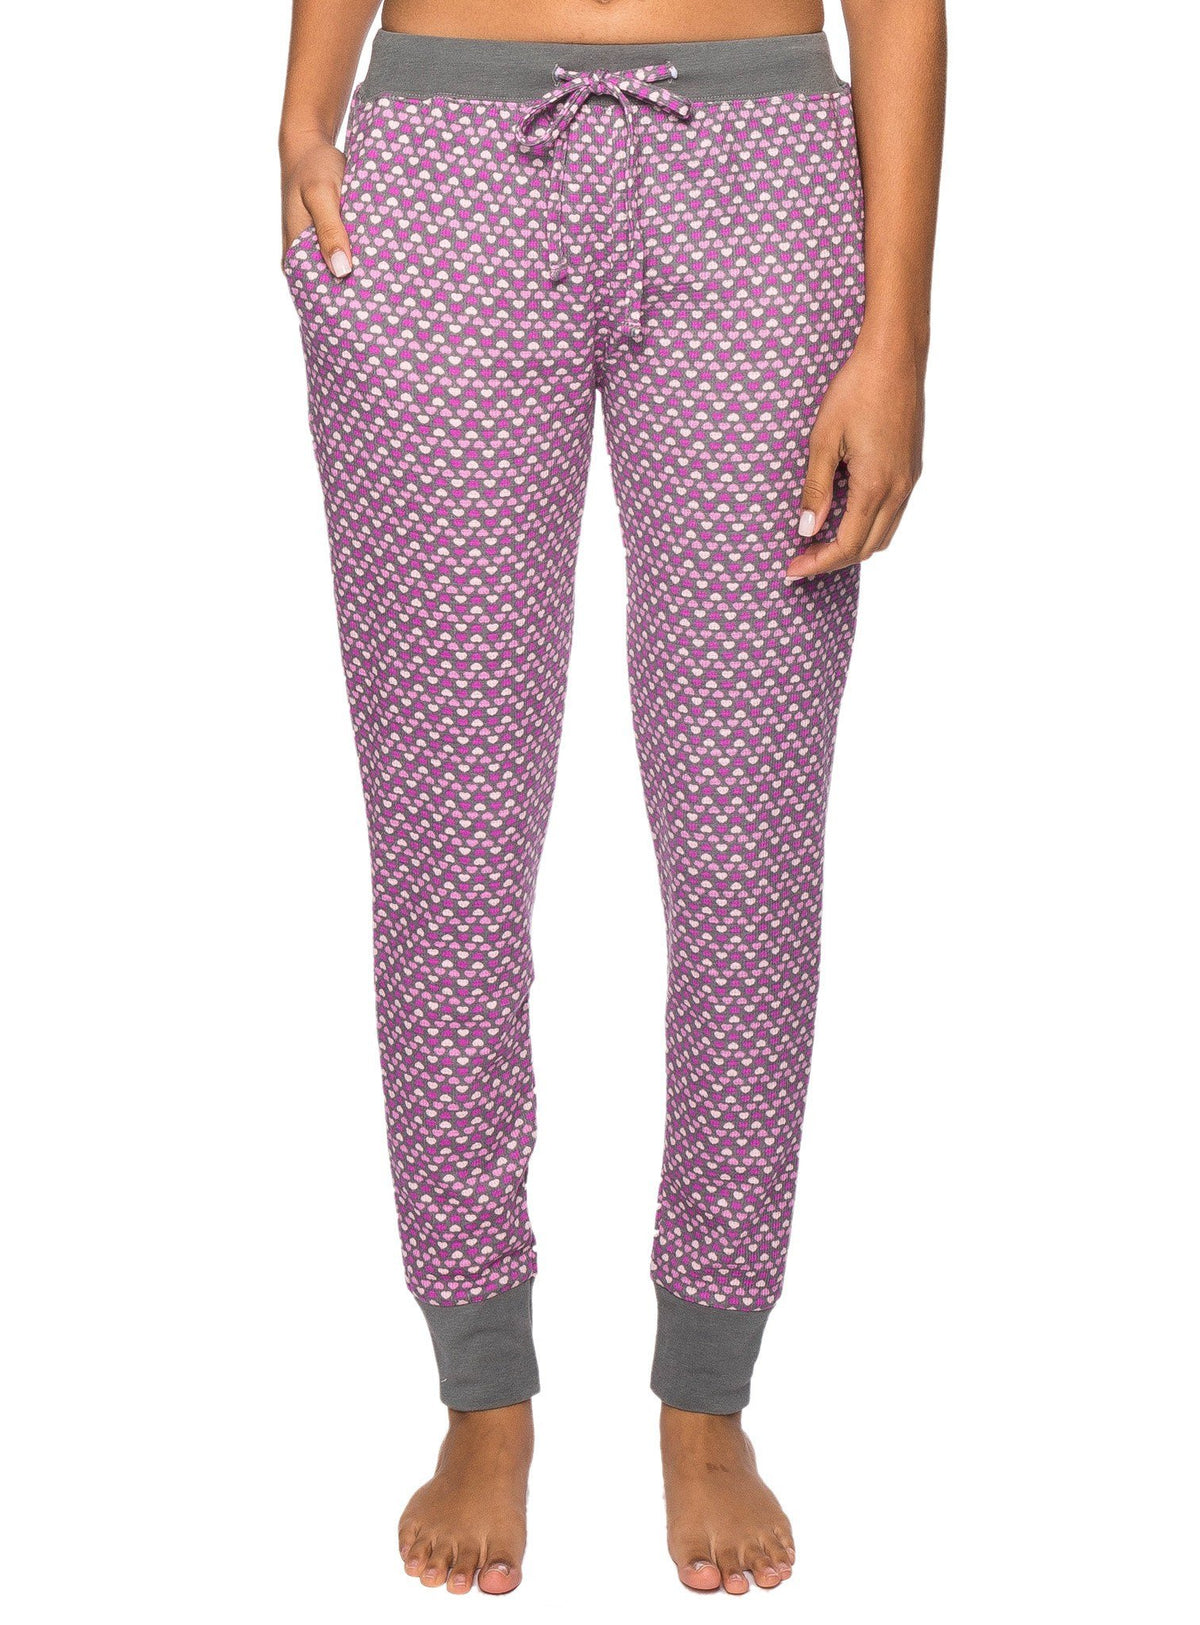 Women's Waffle Knit Thermal Jogger Lounge Pants - Hearts Multi Charcoal/Pink